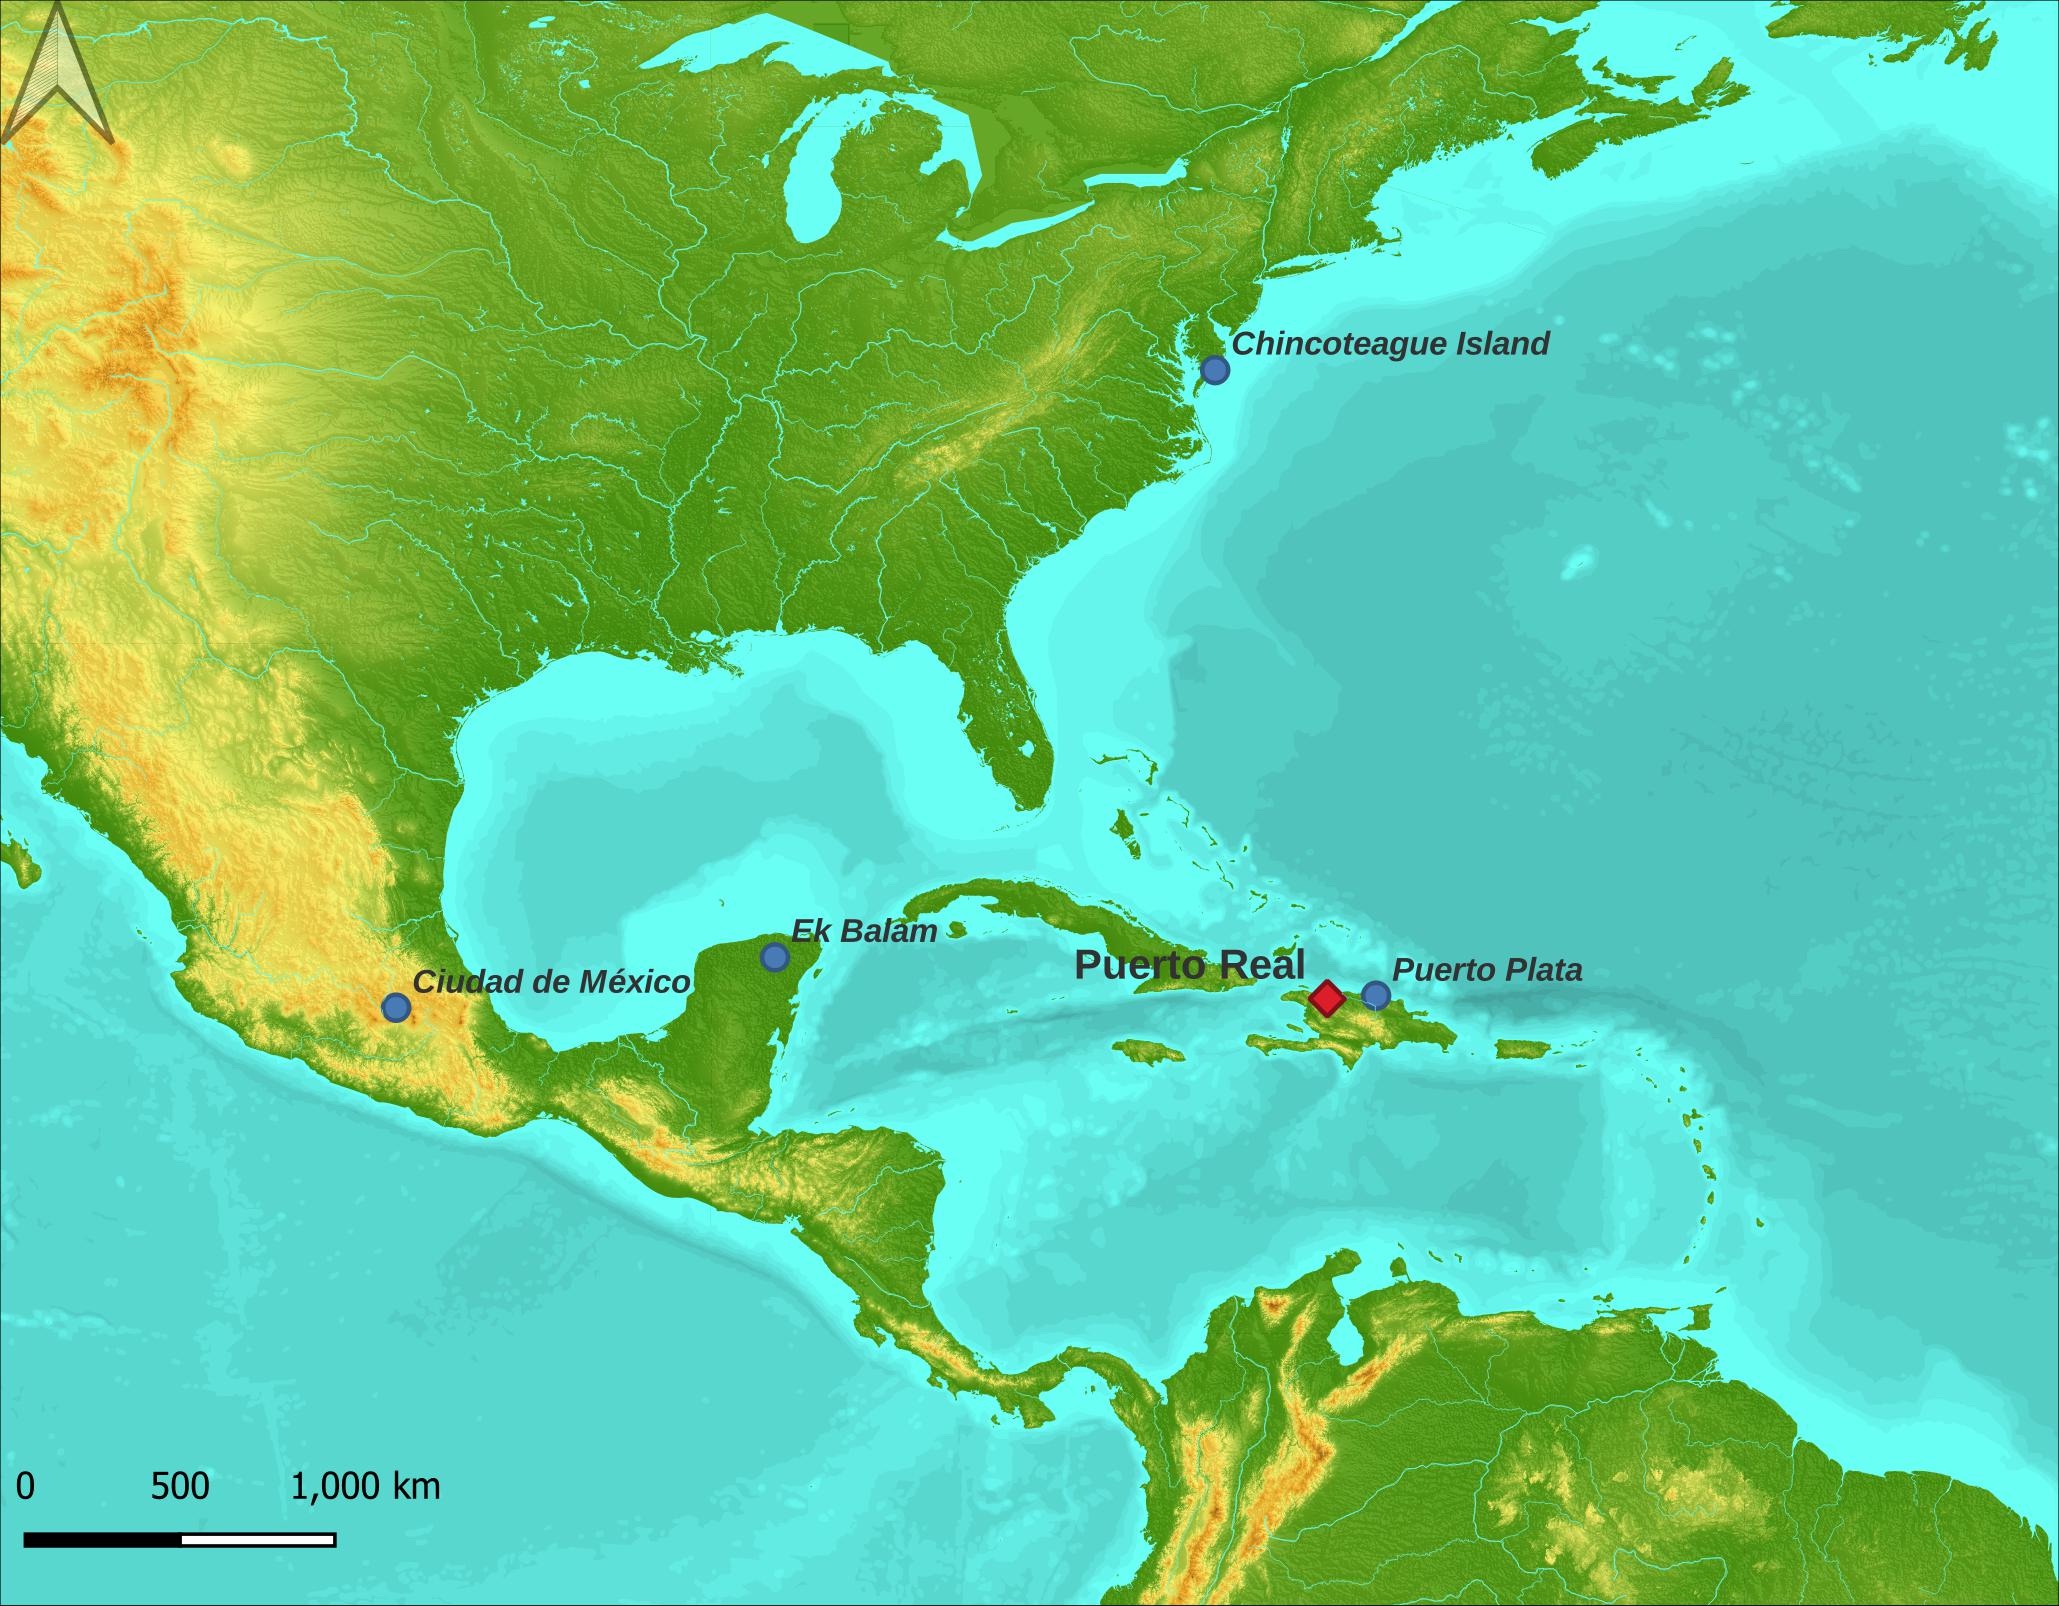 Map of the Caribbean and Central America, highlighting the location of Puerto Real in Hispaniola in relation to Chincoteague island in Virginia